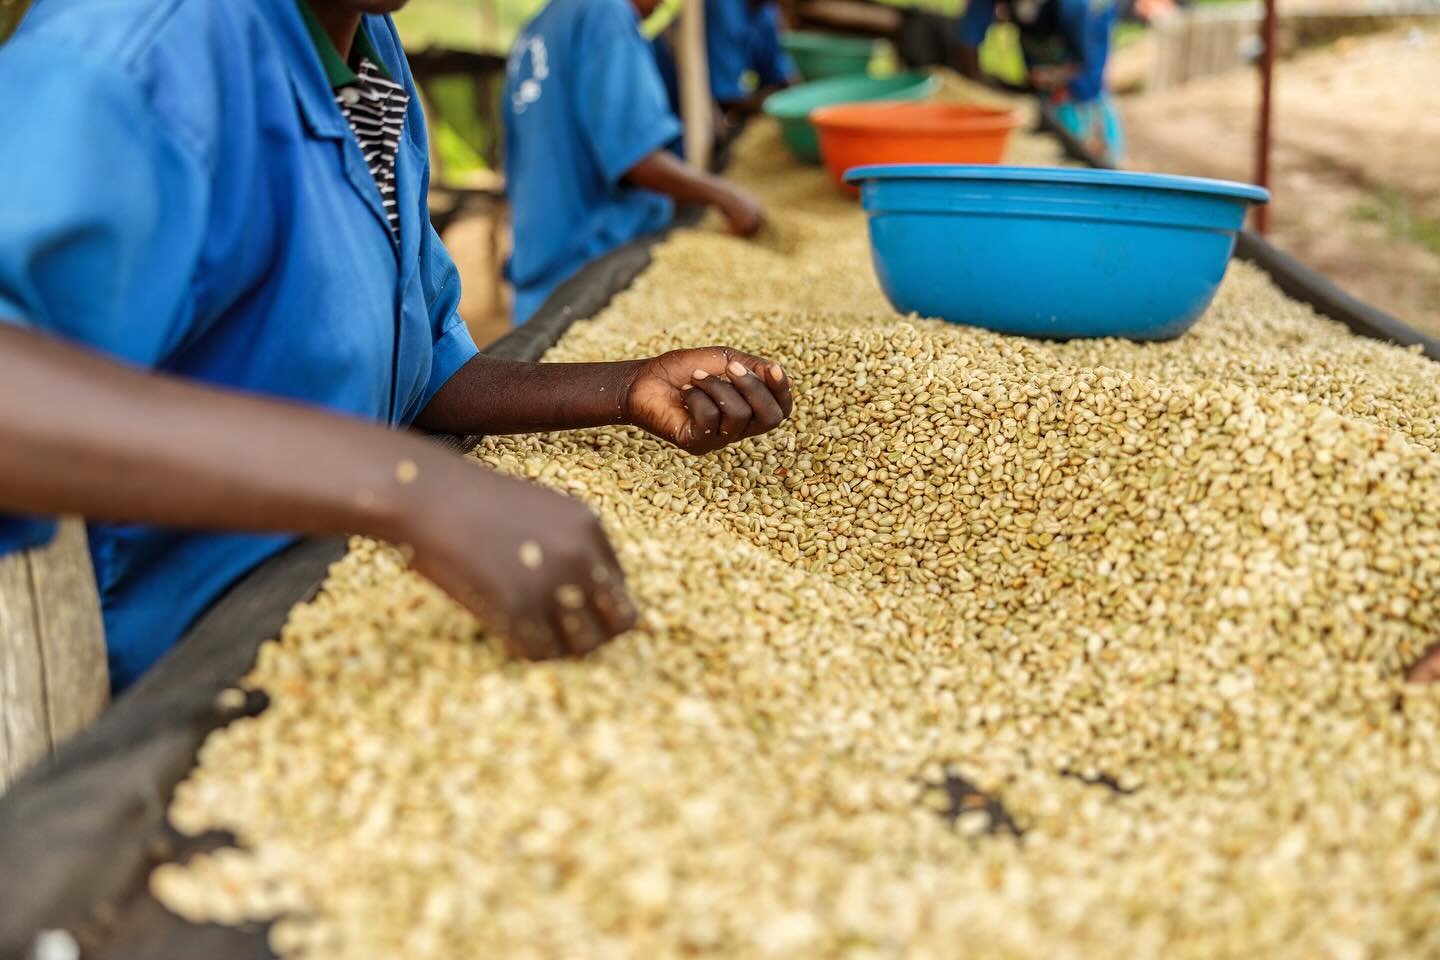 drying tables are full as Rwanda enters the peak of the 2024 harvest 🌞

we&rsquo;ll be sharing lots of updates here in the coming weeks as we prepare for our visit in June! 

now is the time to start thinking about needs for next year if you&rsquo;d